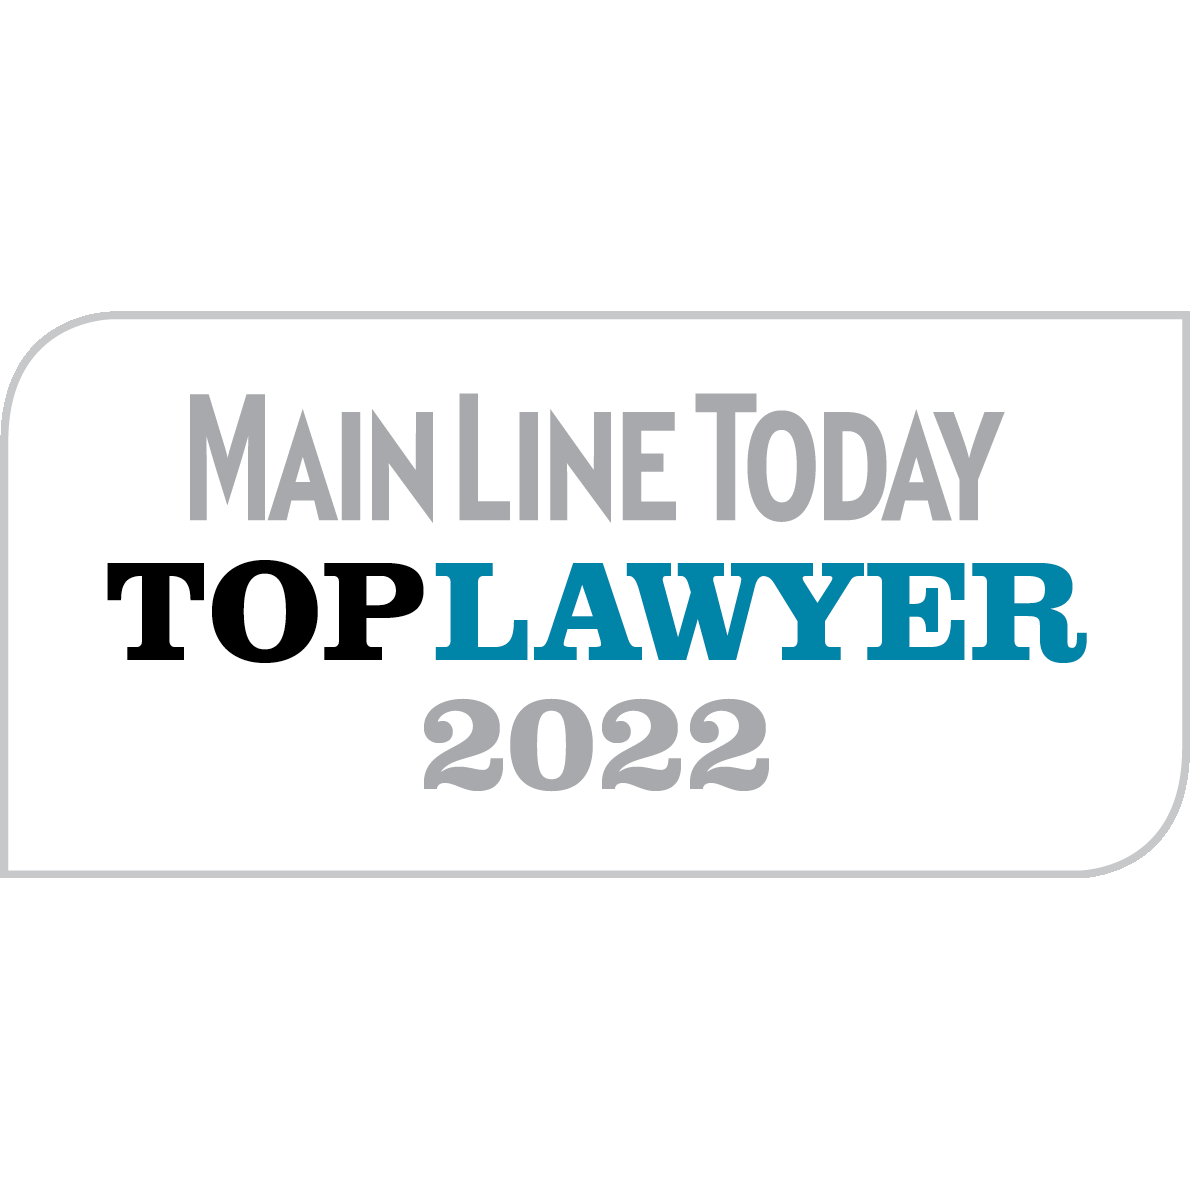 MainLine Today Top Lawyer 2022